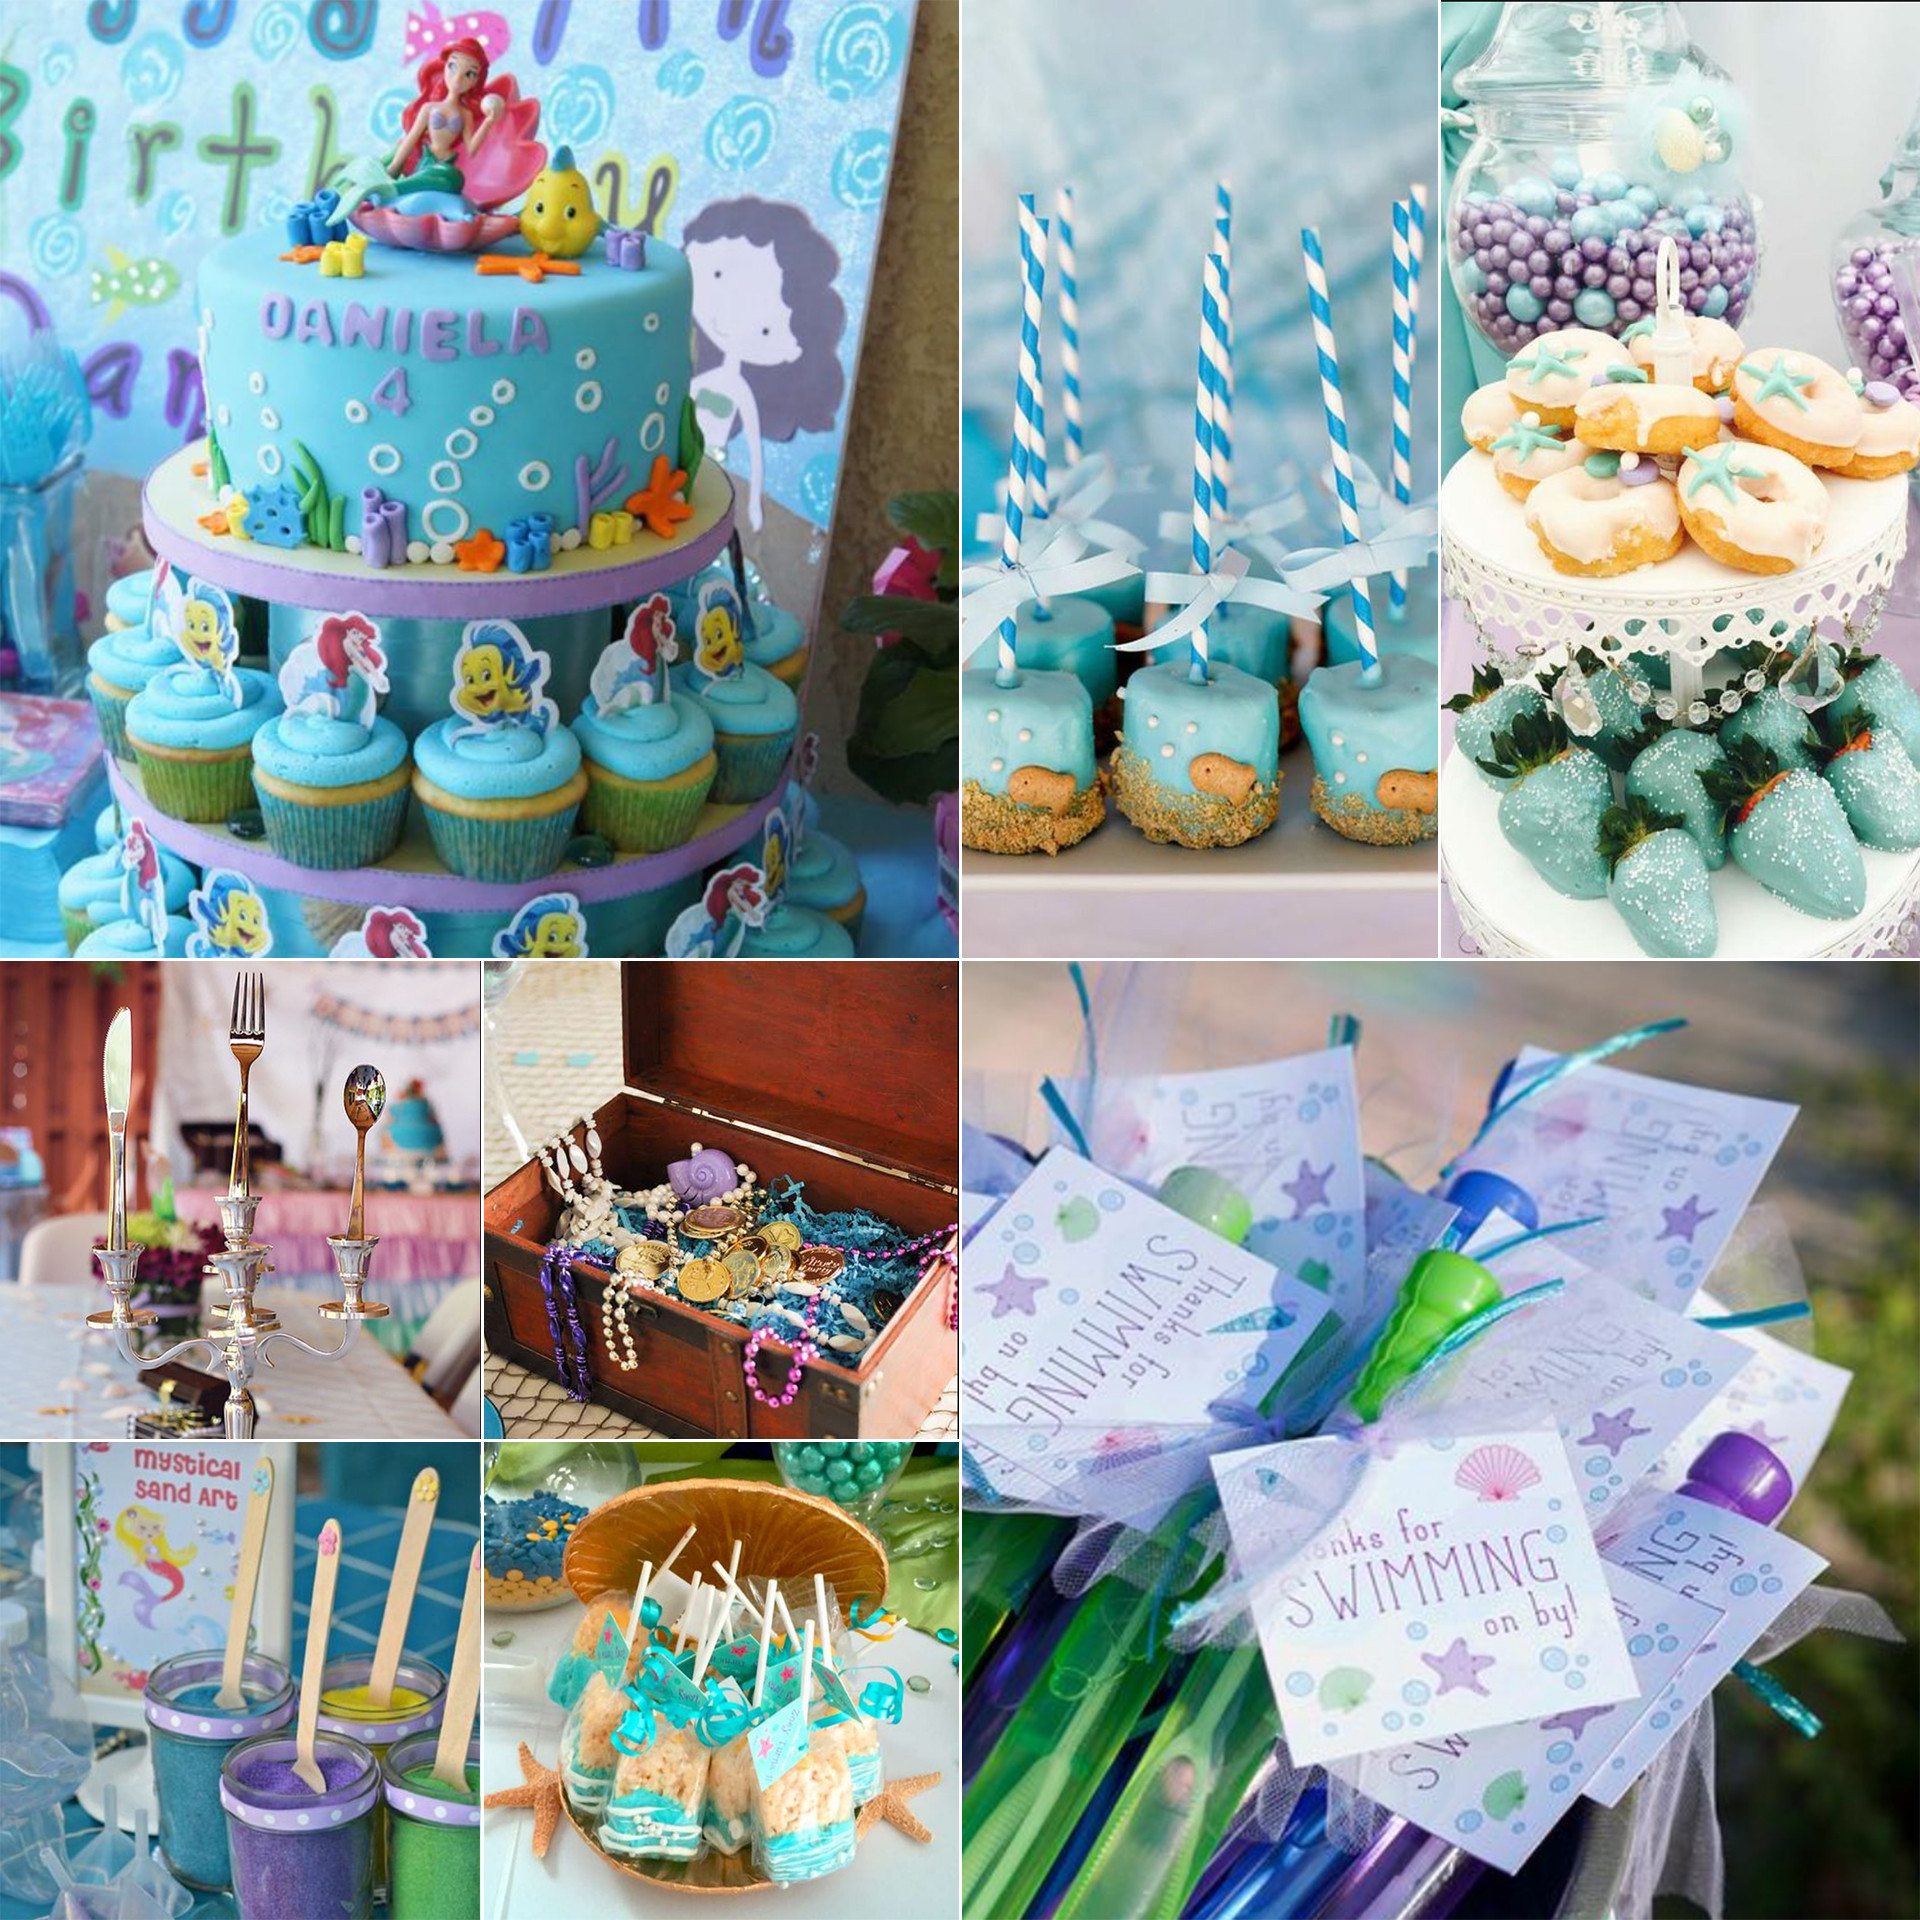 The Little Mermaid Theme Party Ideas
 Under the Sea Little Mermaid Party 